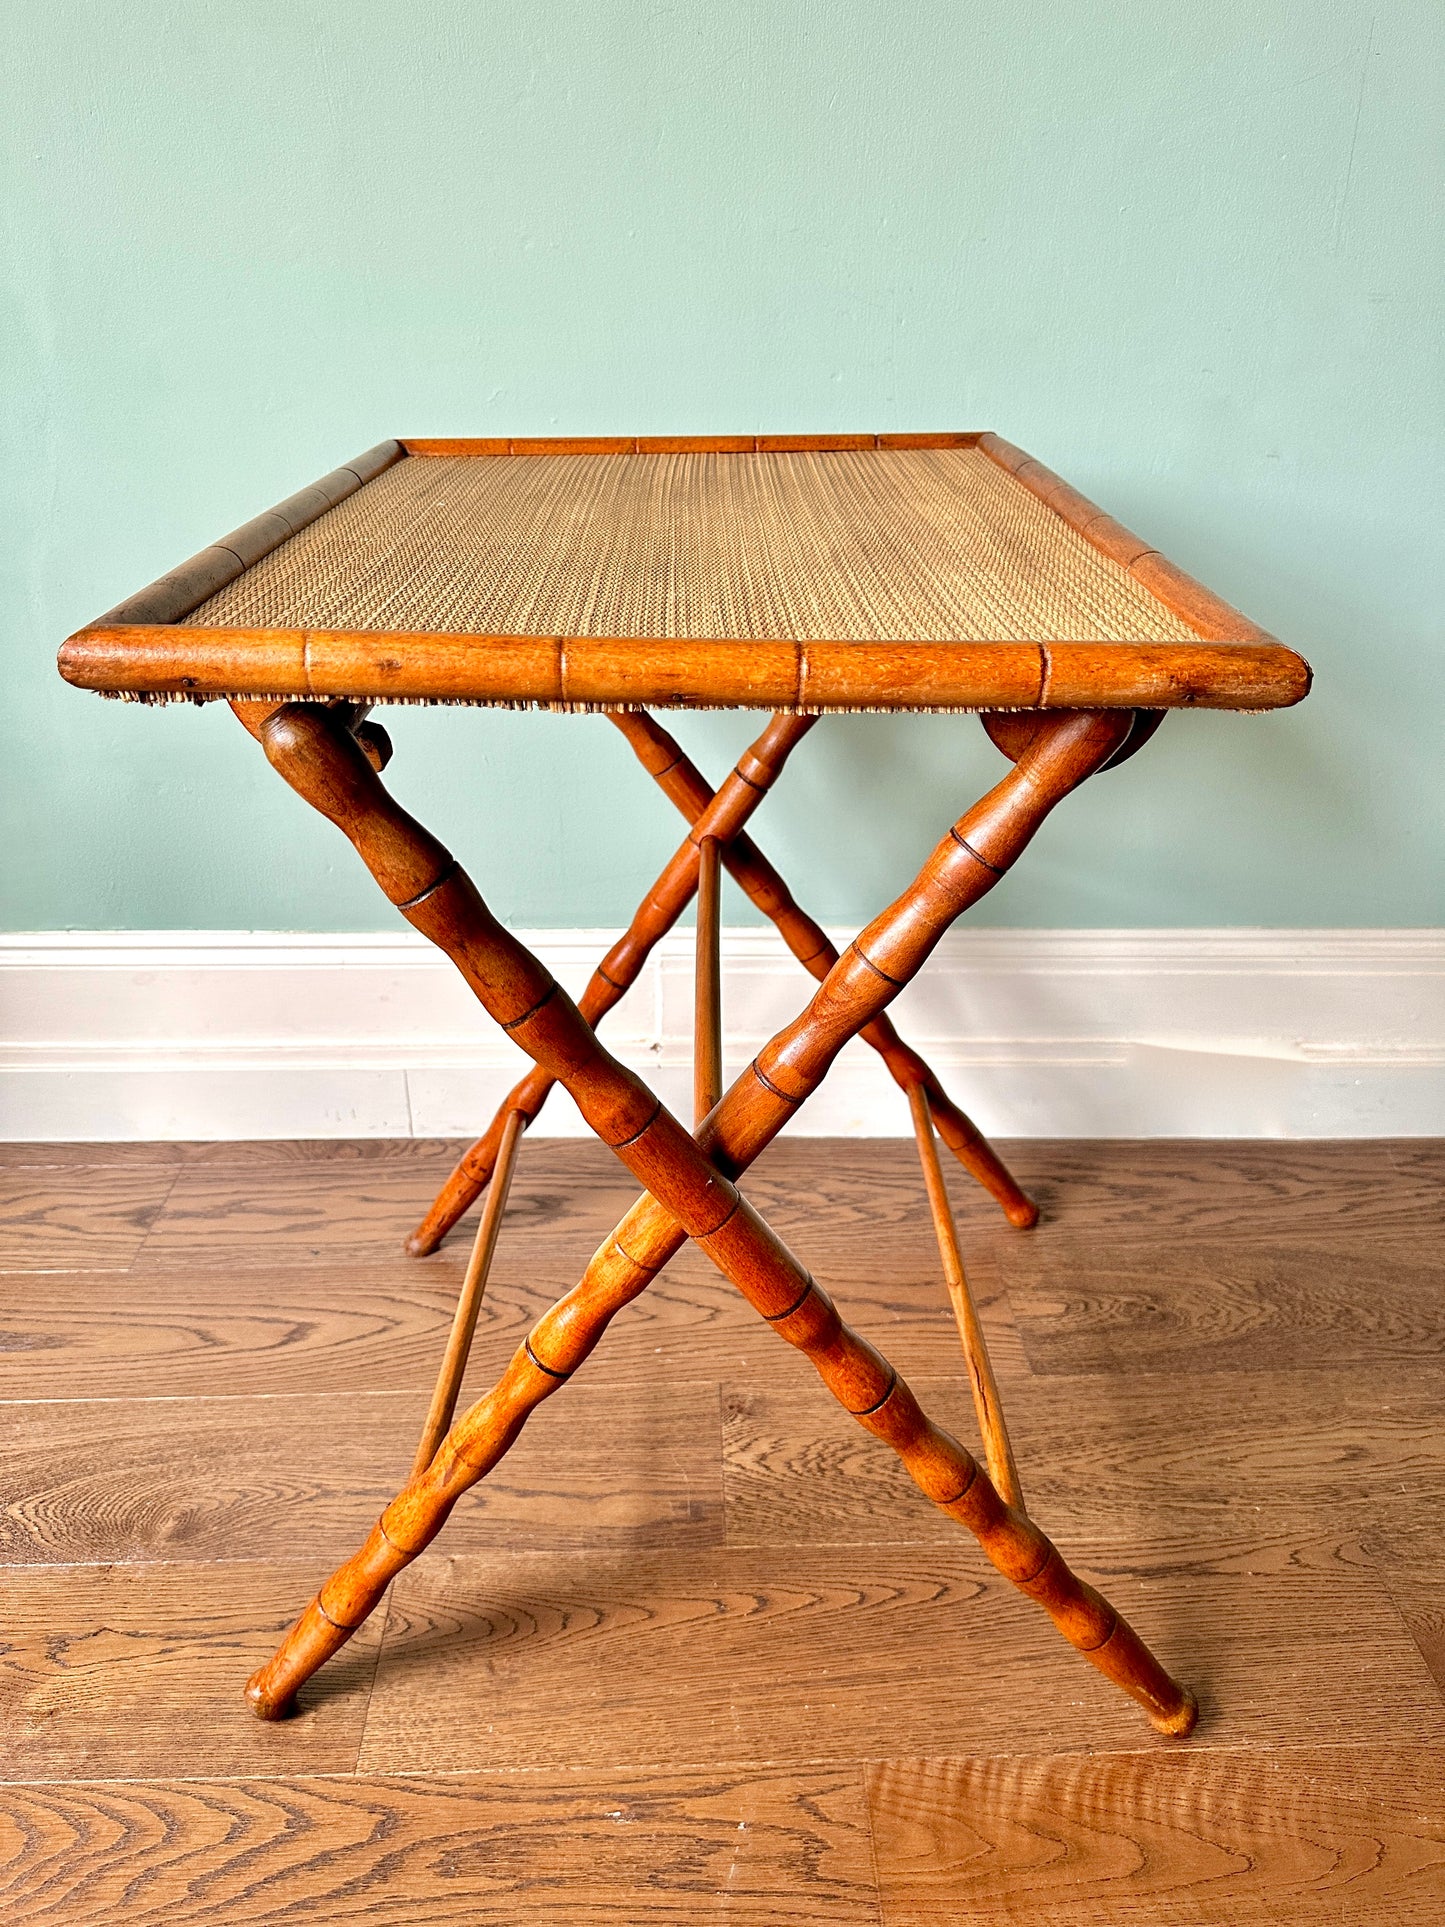 C19th French Cherrywood Folding Table